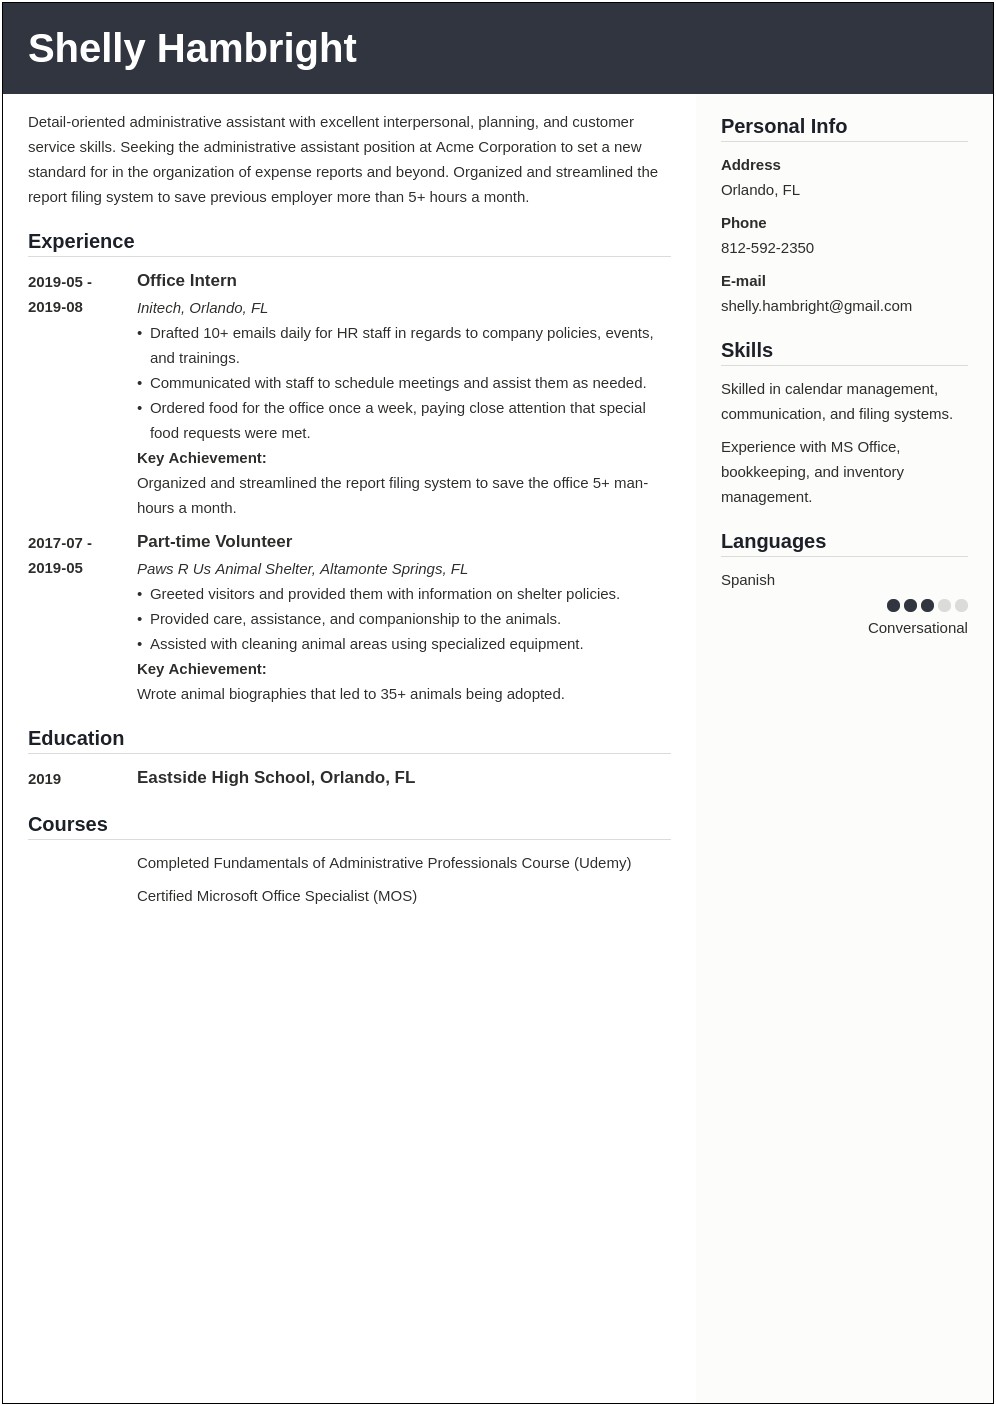 Resume Examples Or Entry Level Administrative Jobs